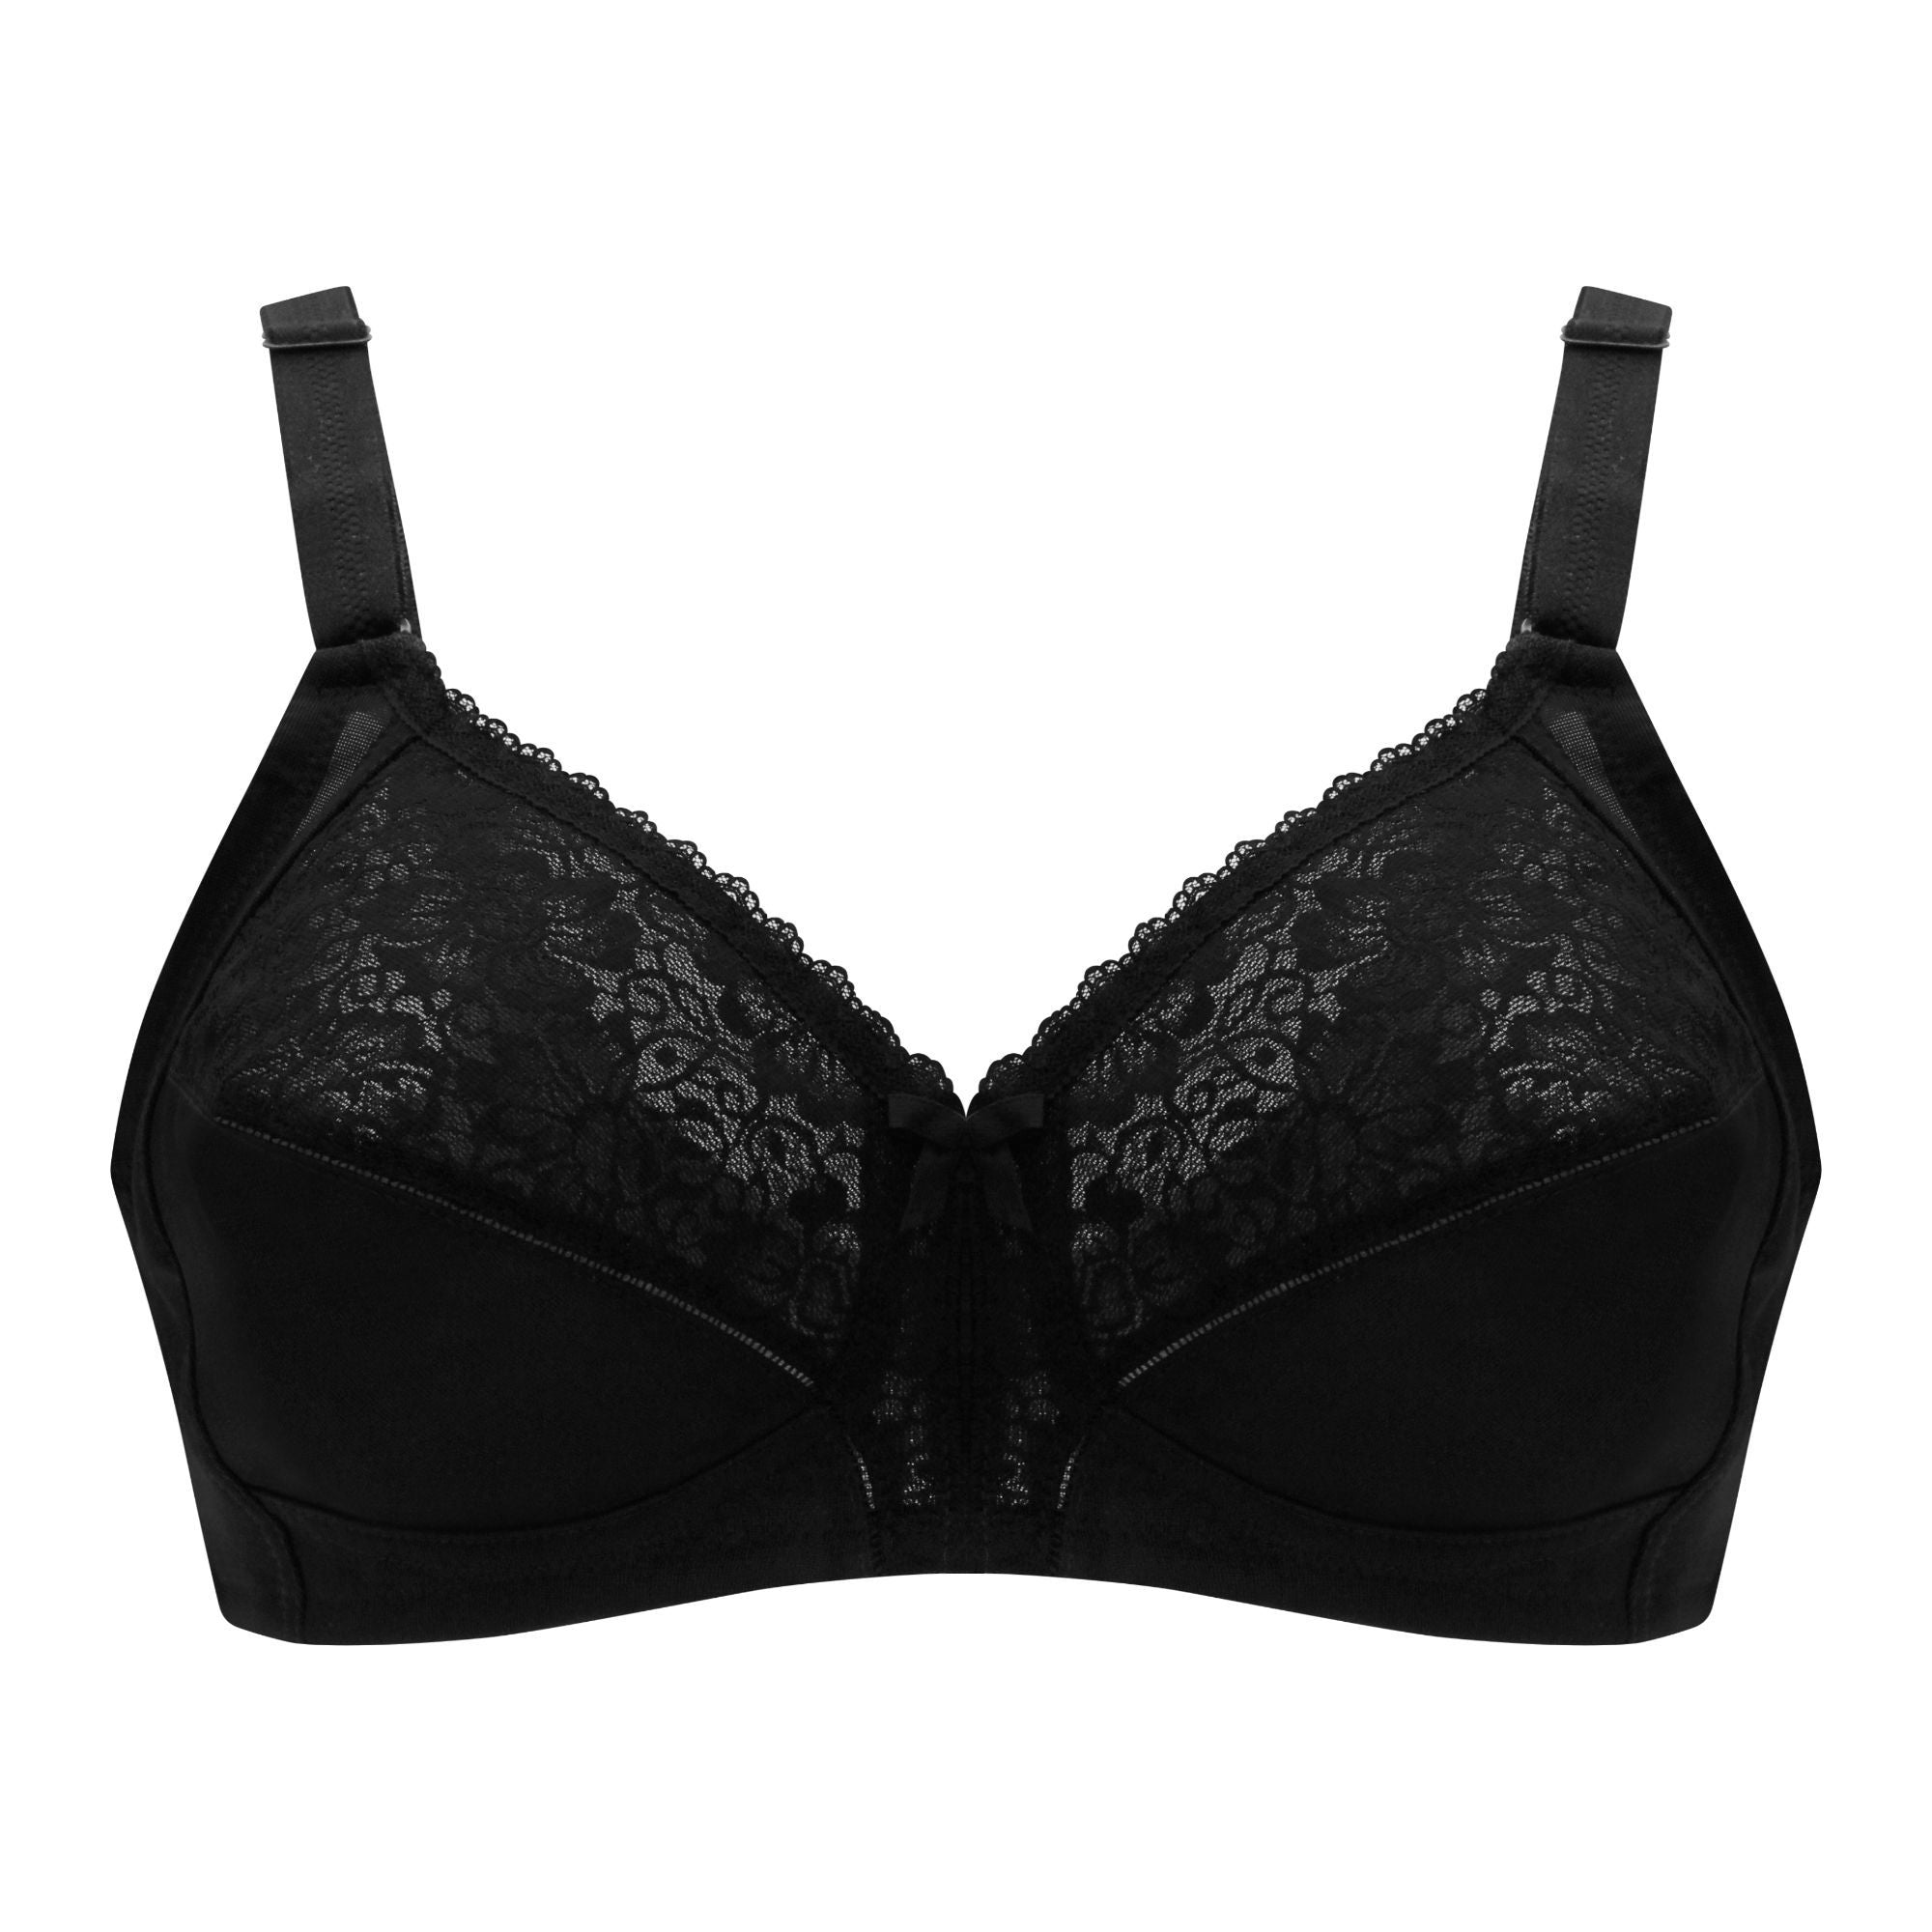 IFG: BRAS. VISION. Half Net and - MISS Undergarments